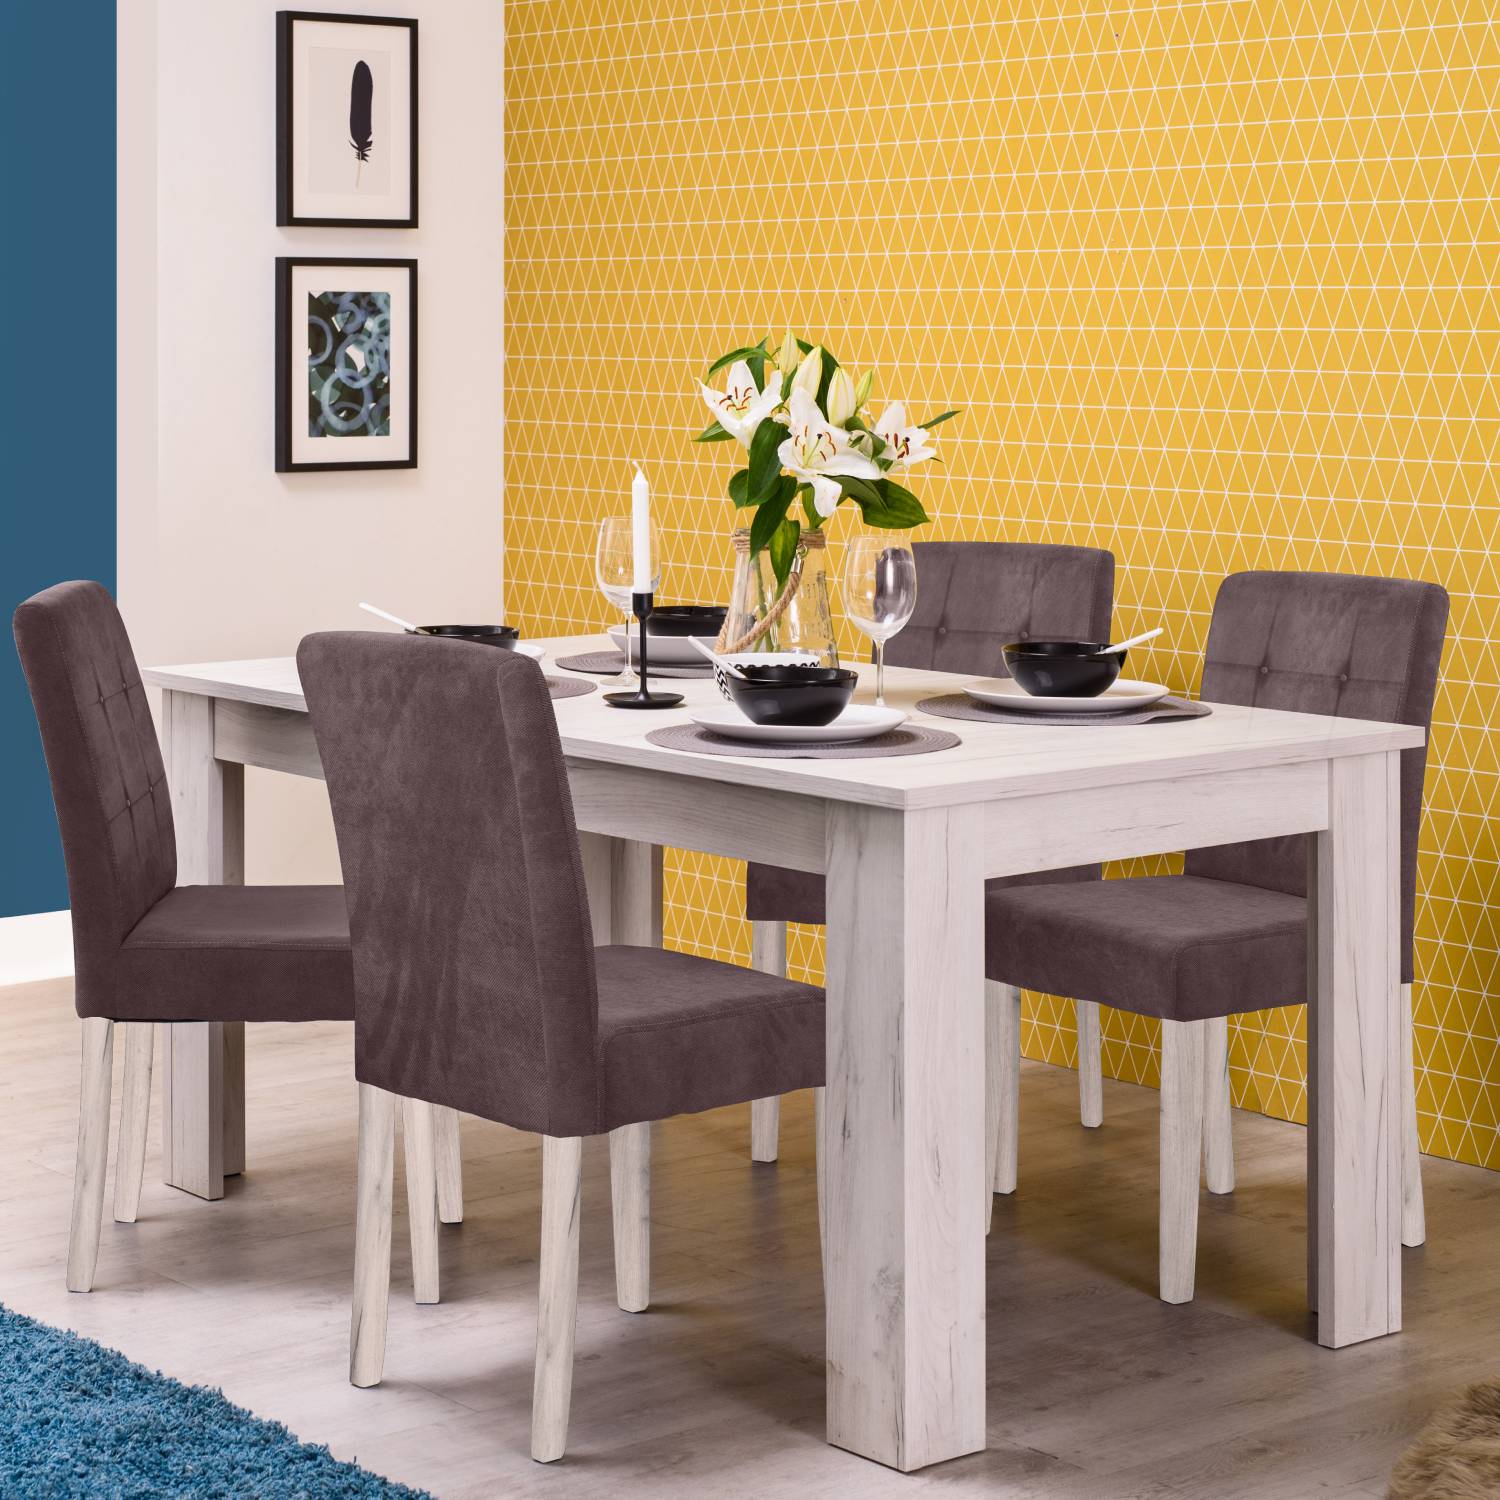 Dining Table 90x160 Extendable Several Colours Wooden Table Kitchen Table Solid Wood